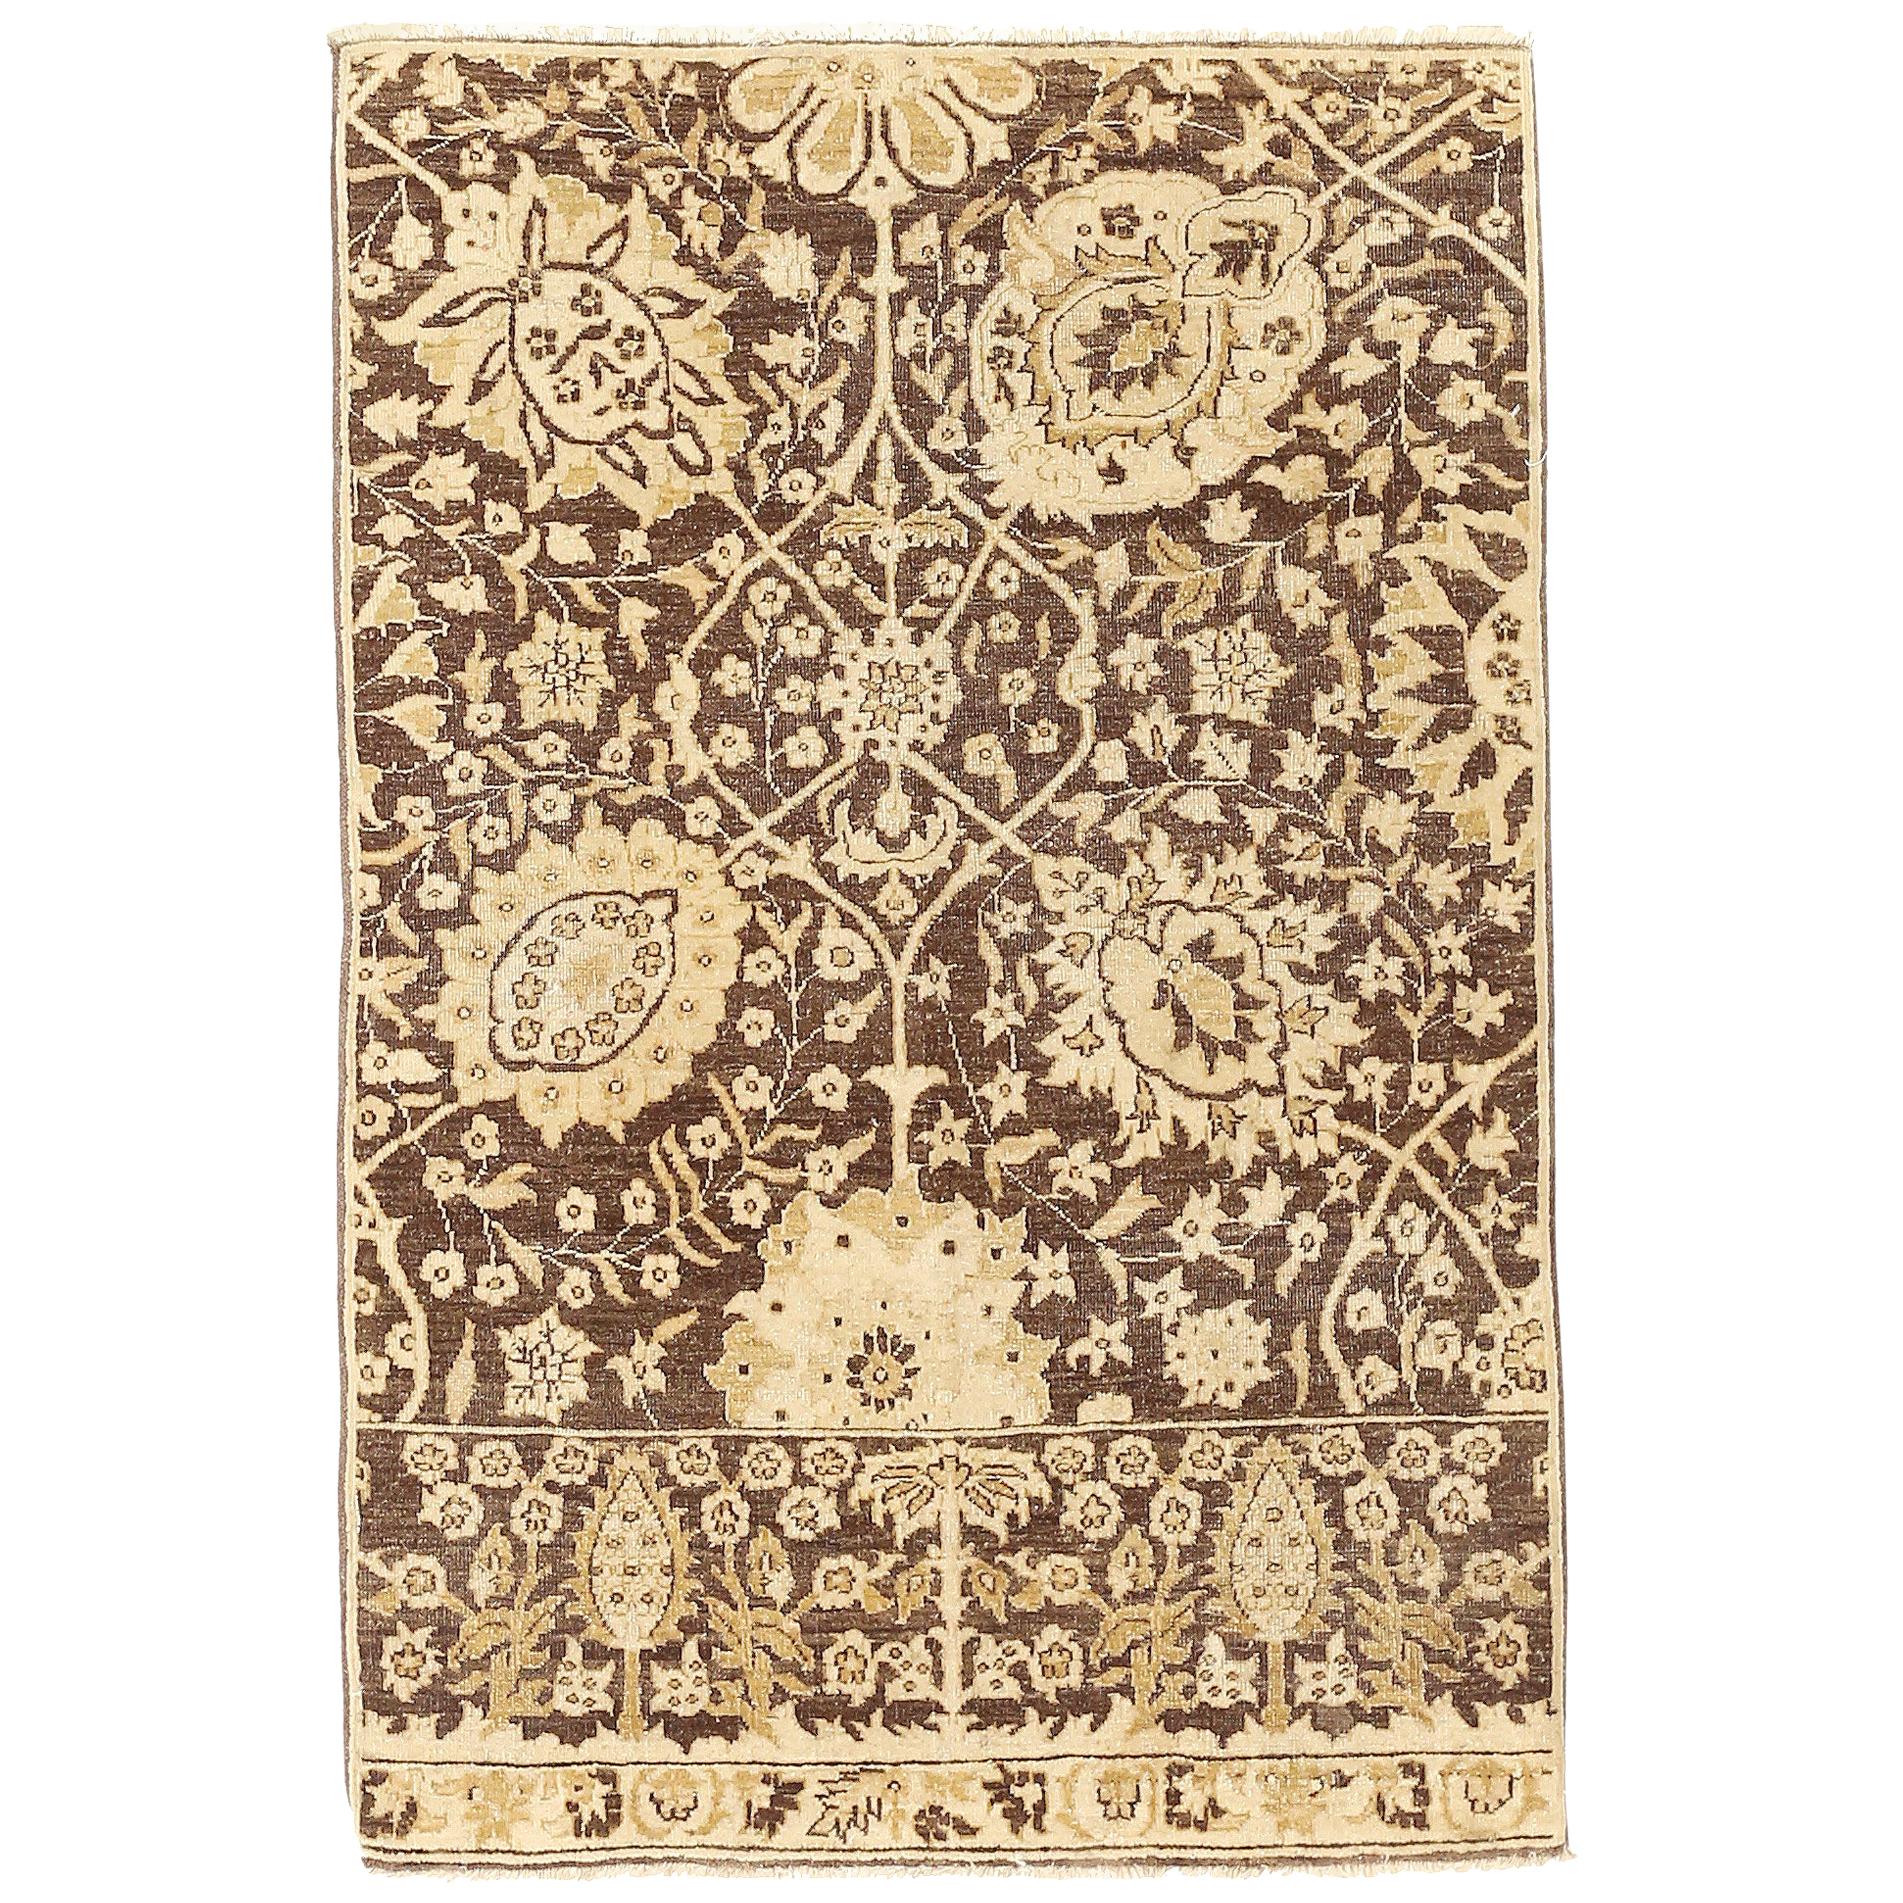 New Tabriz Rug with Beige and Brown Flower Motifs on Ivory Field For Sale